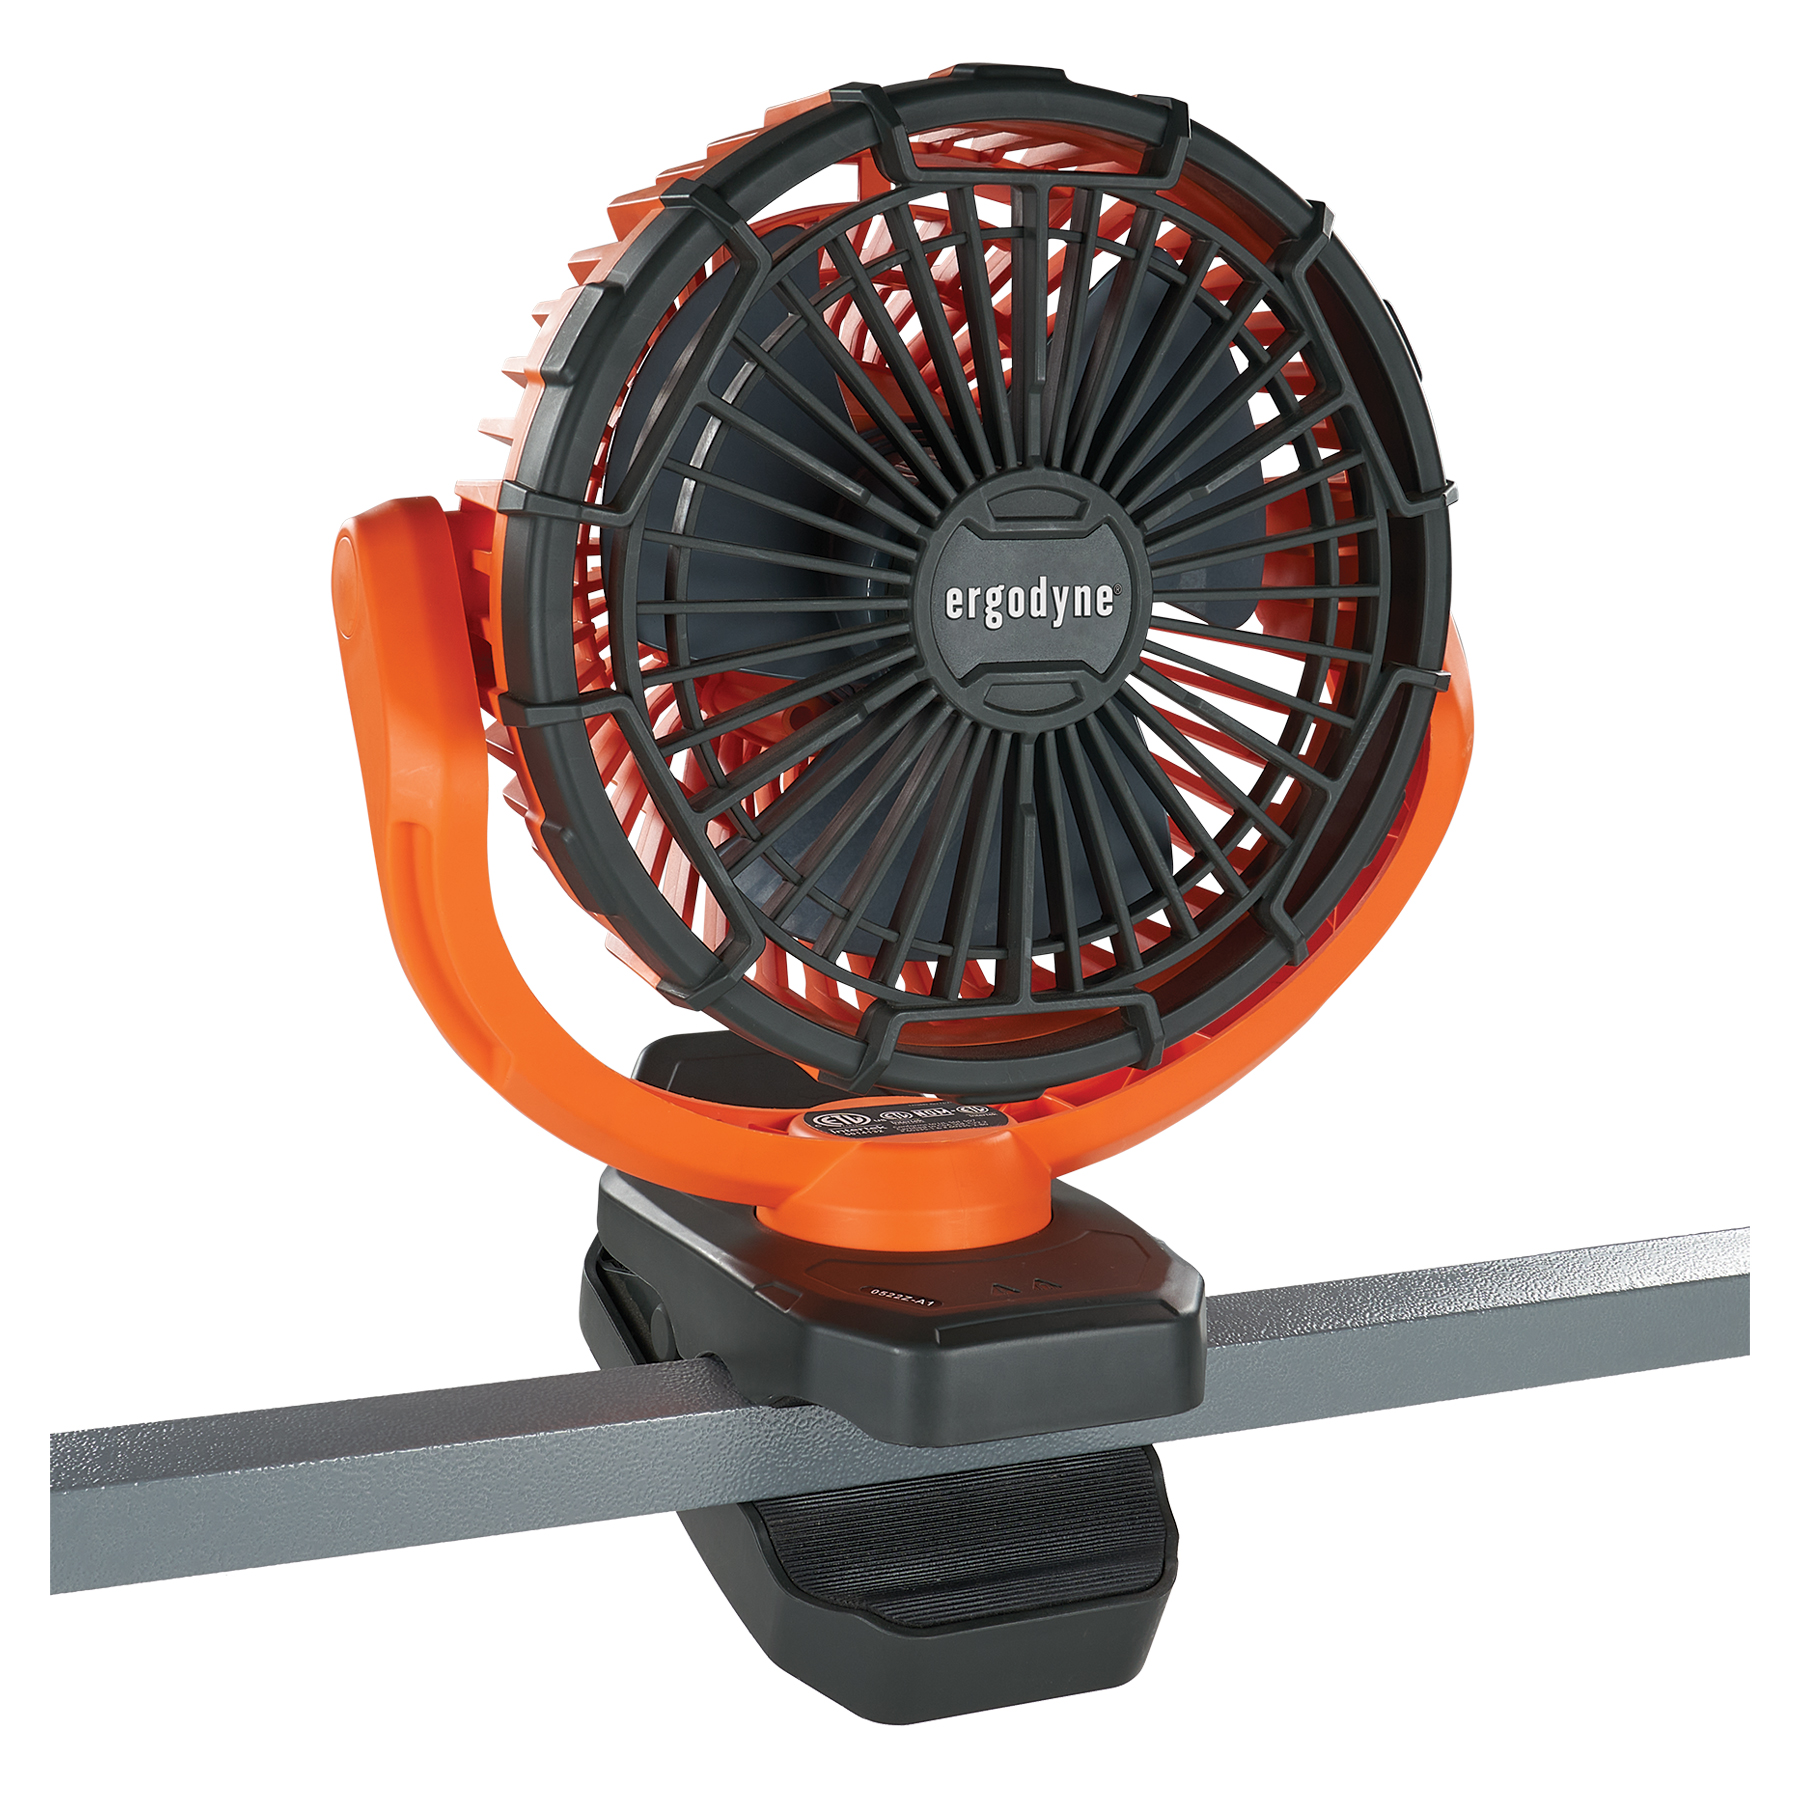 Ergodyne Chill-Its 6090 Rechargeable Portable Jobsite Fan from Columbia Safety